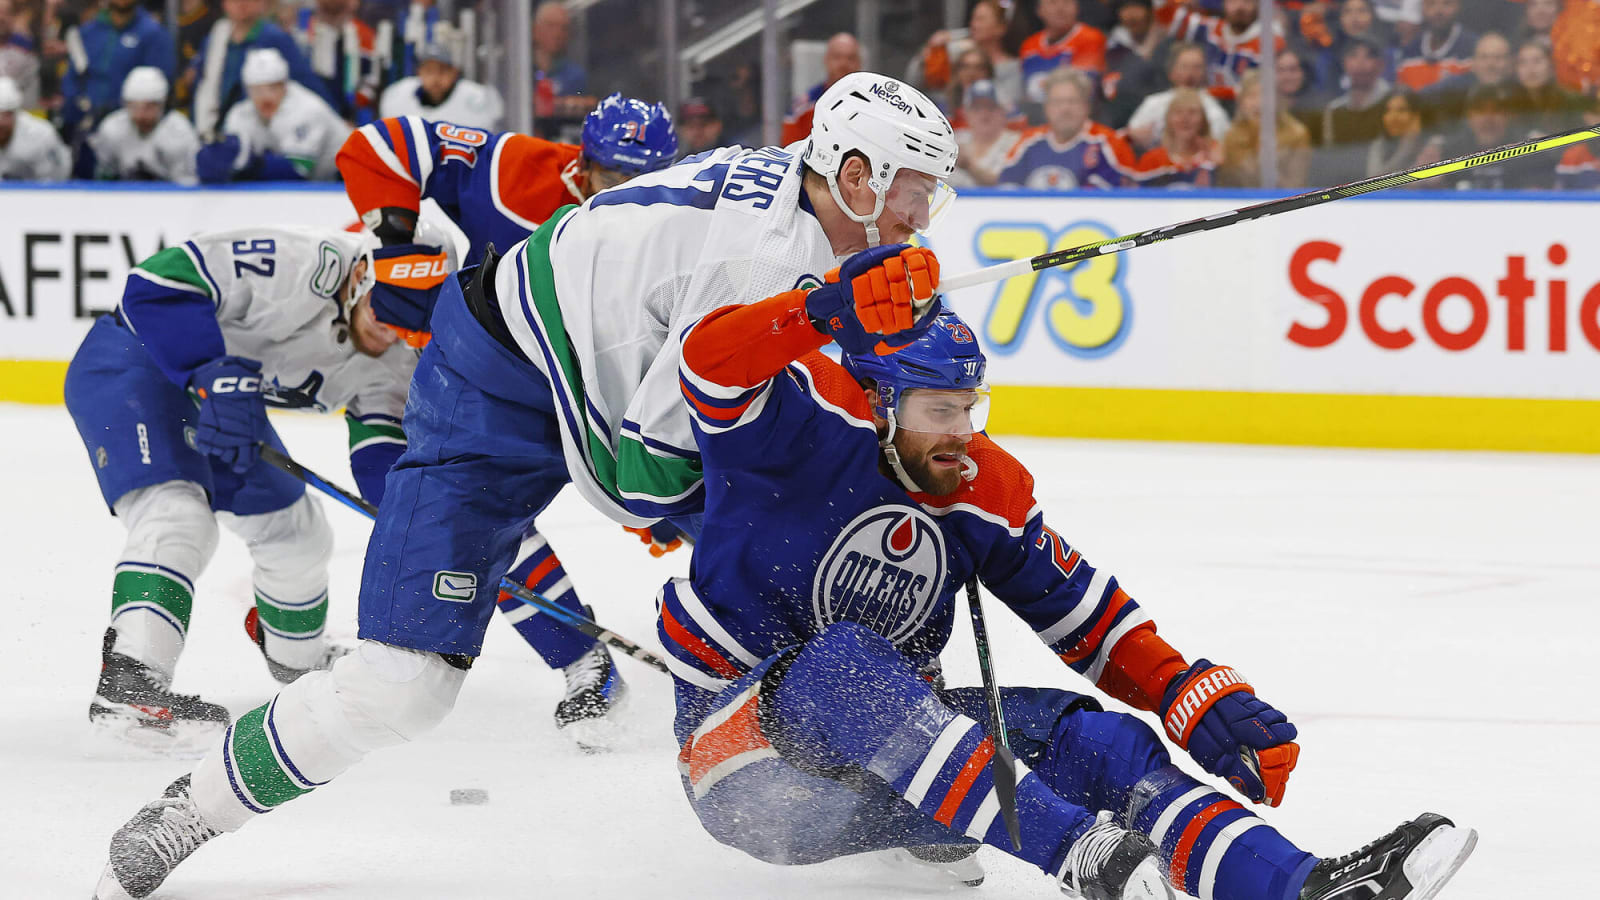 Oilers Dominate Game 6 to Force Decisive Game 7 vs. Canucks